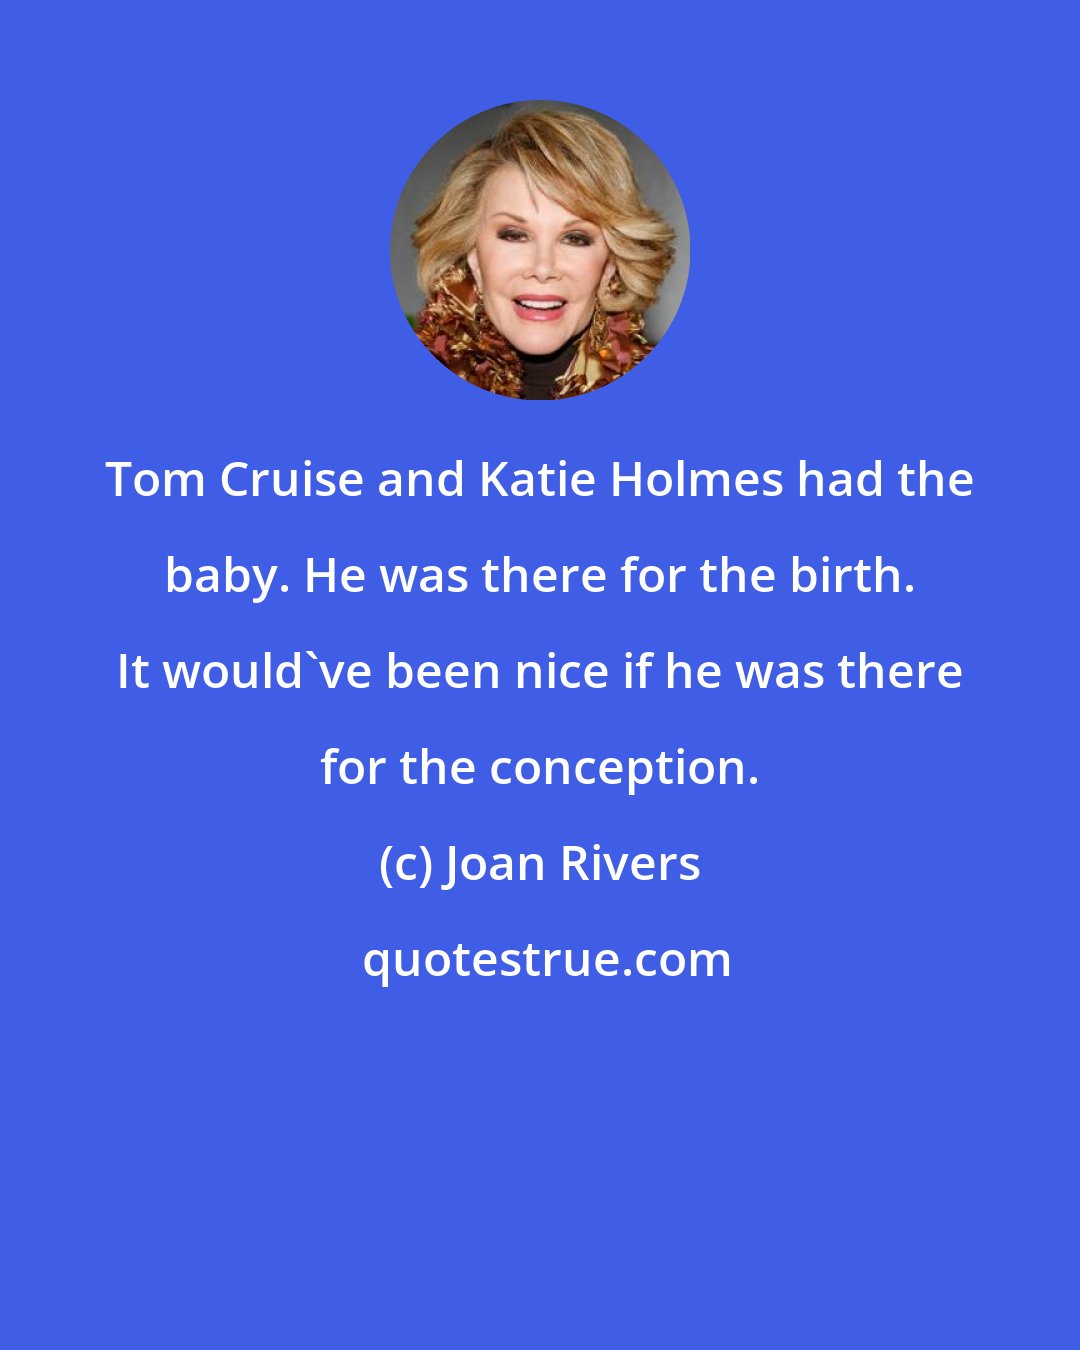 Joan Rivers: Tom Cruise and Katie Holmes had the baby. He was there for the birth. It would've been nice if he was there for the conception.